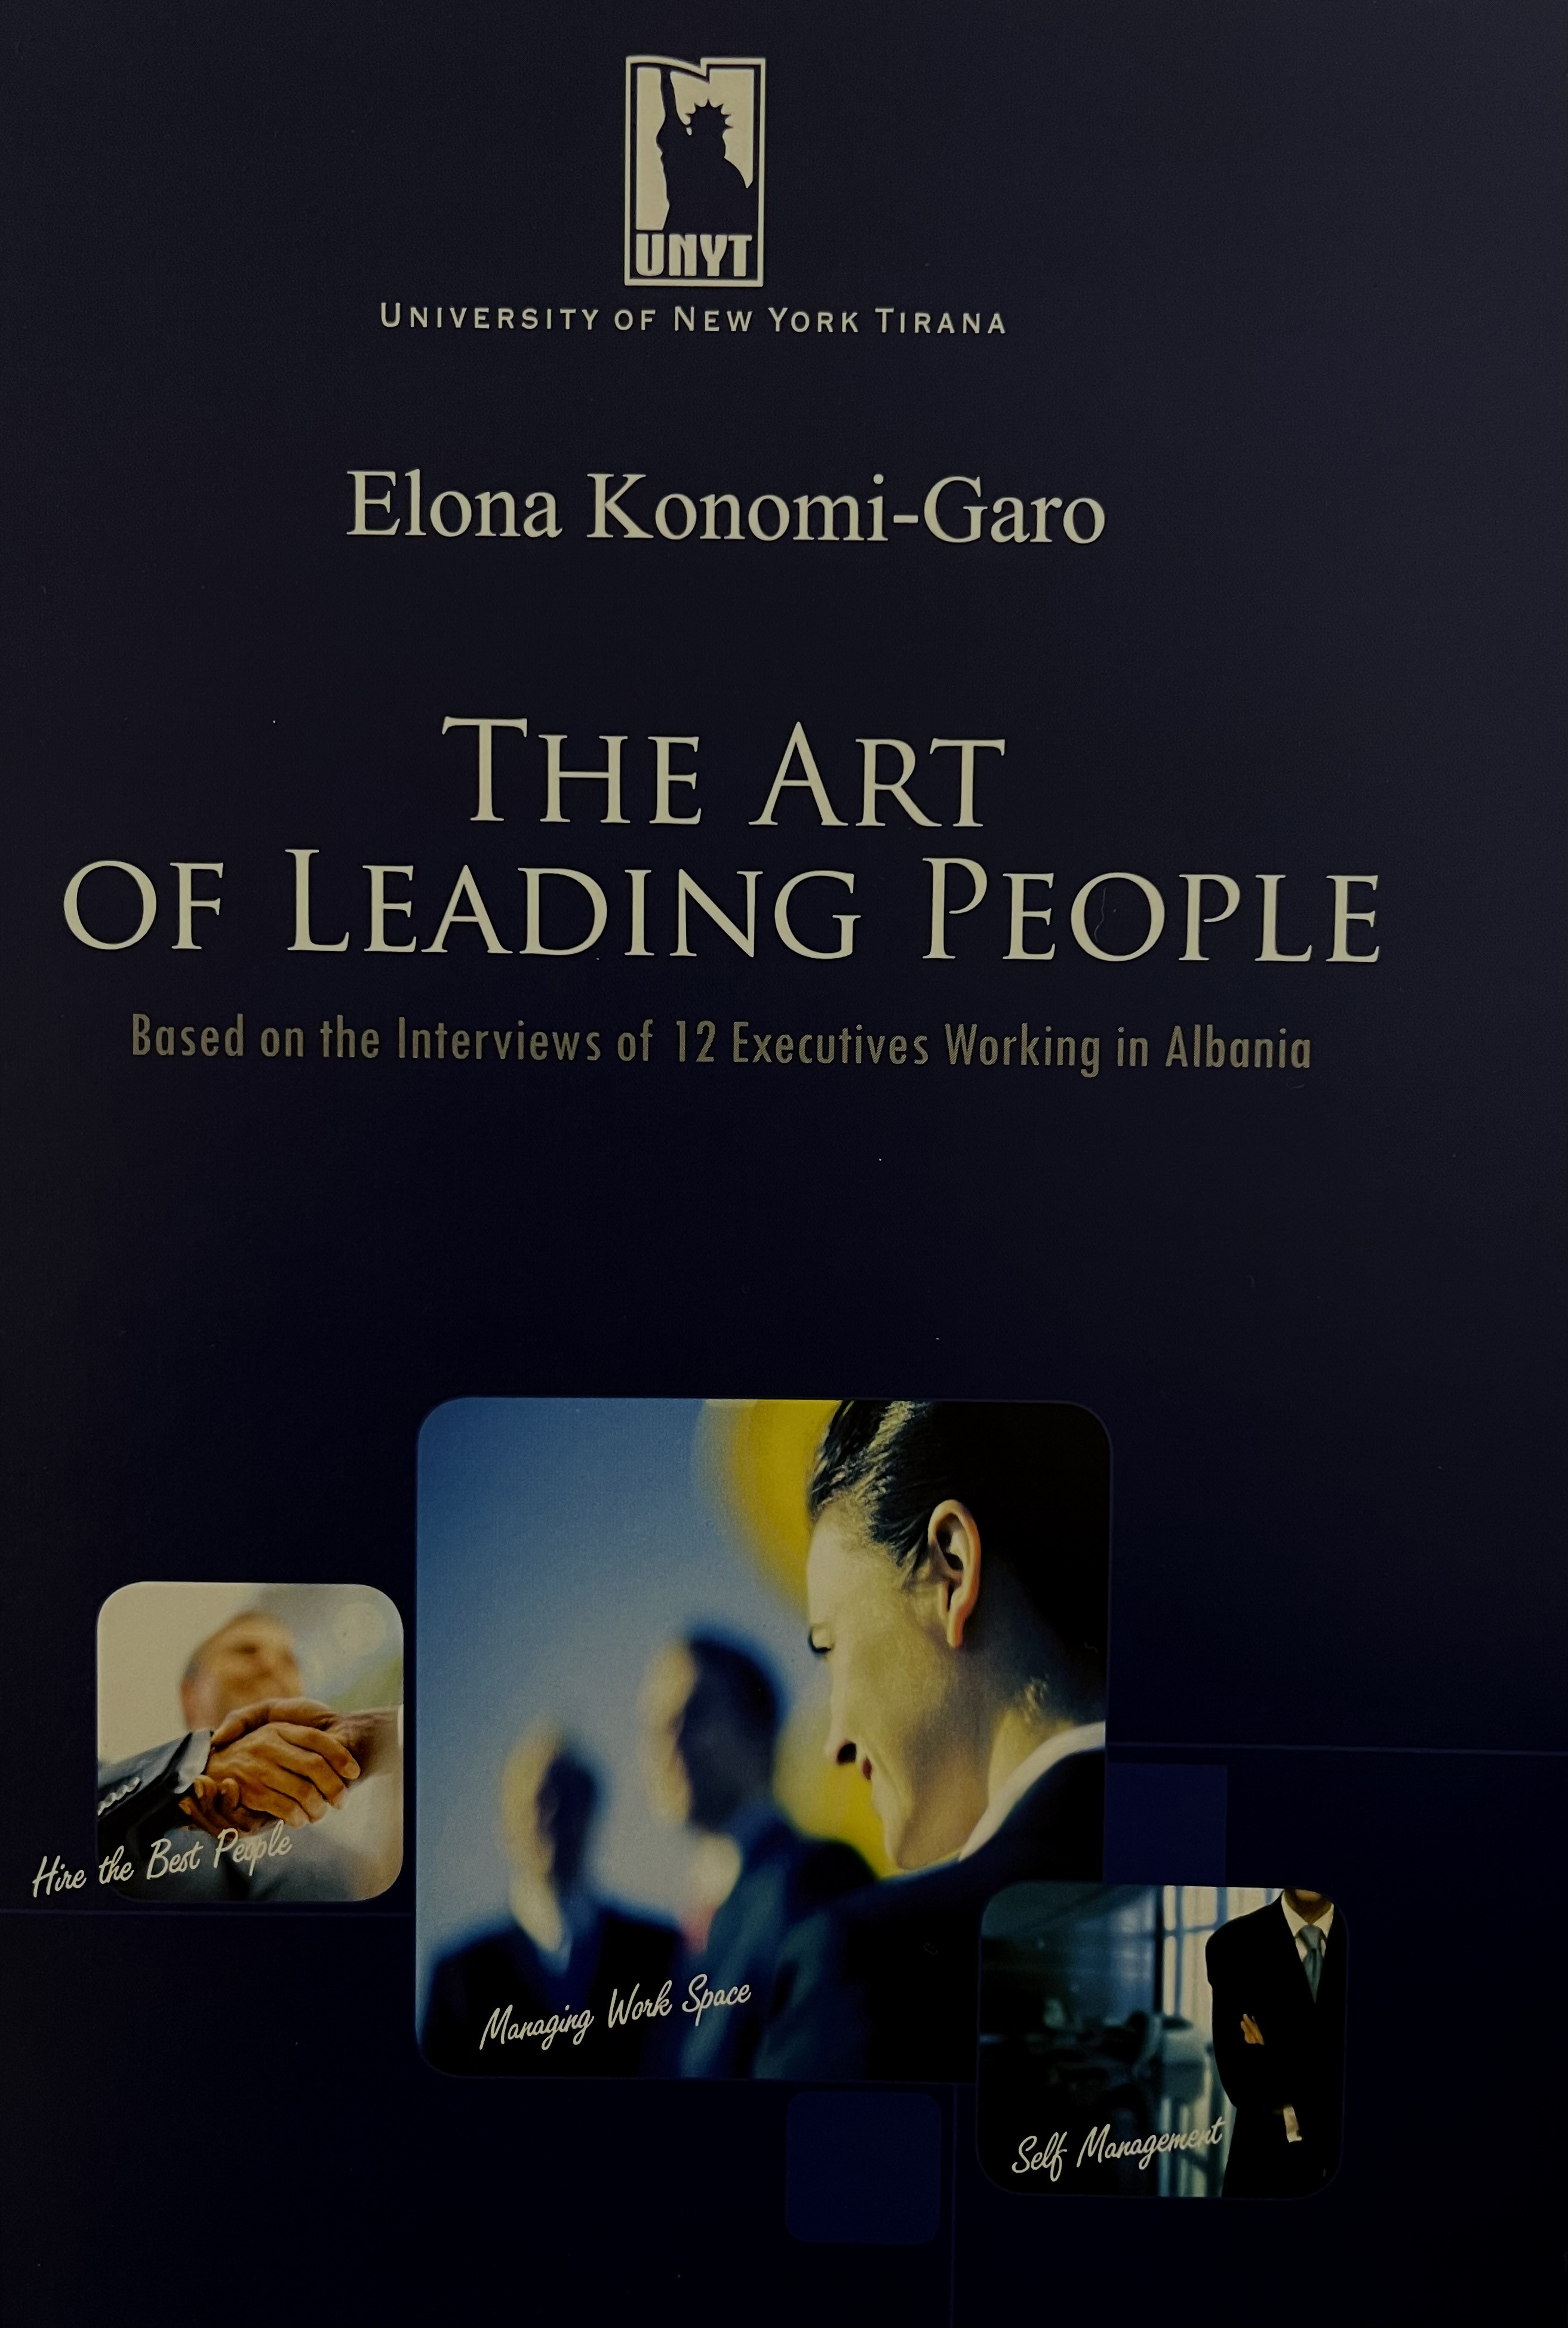 The art of leading people